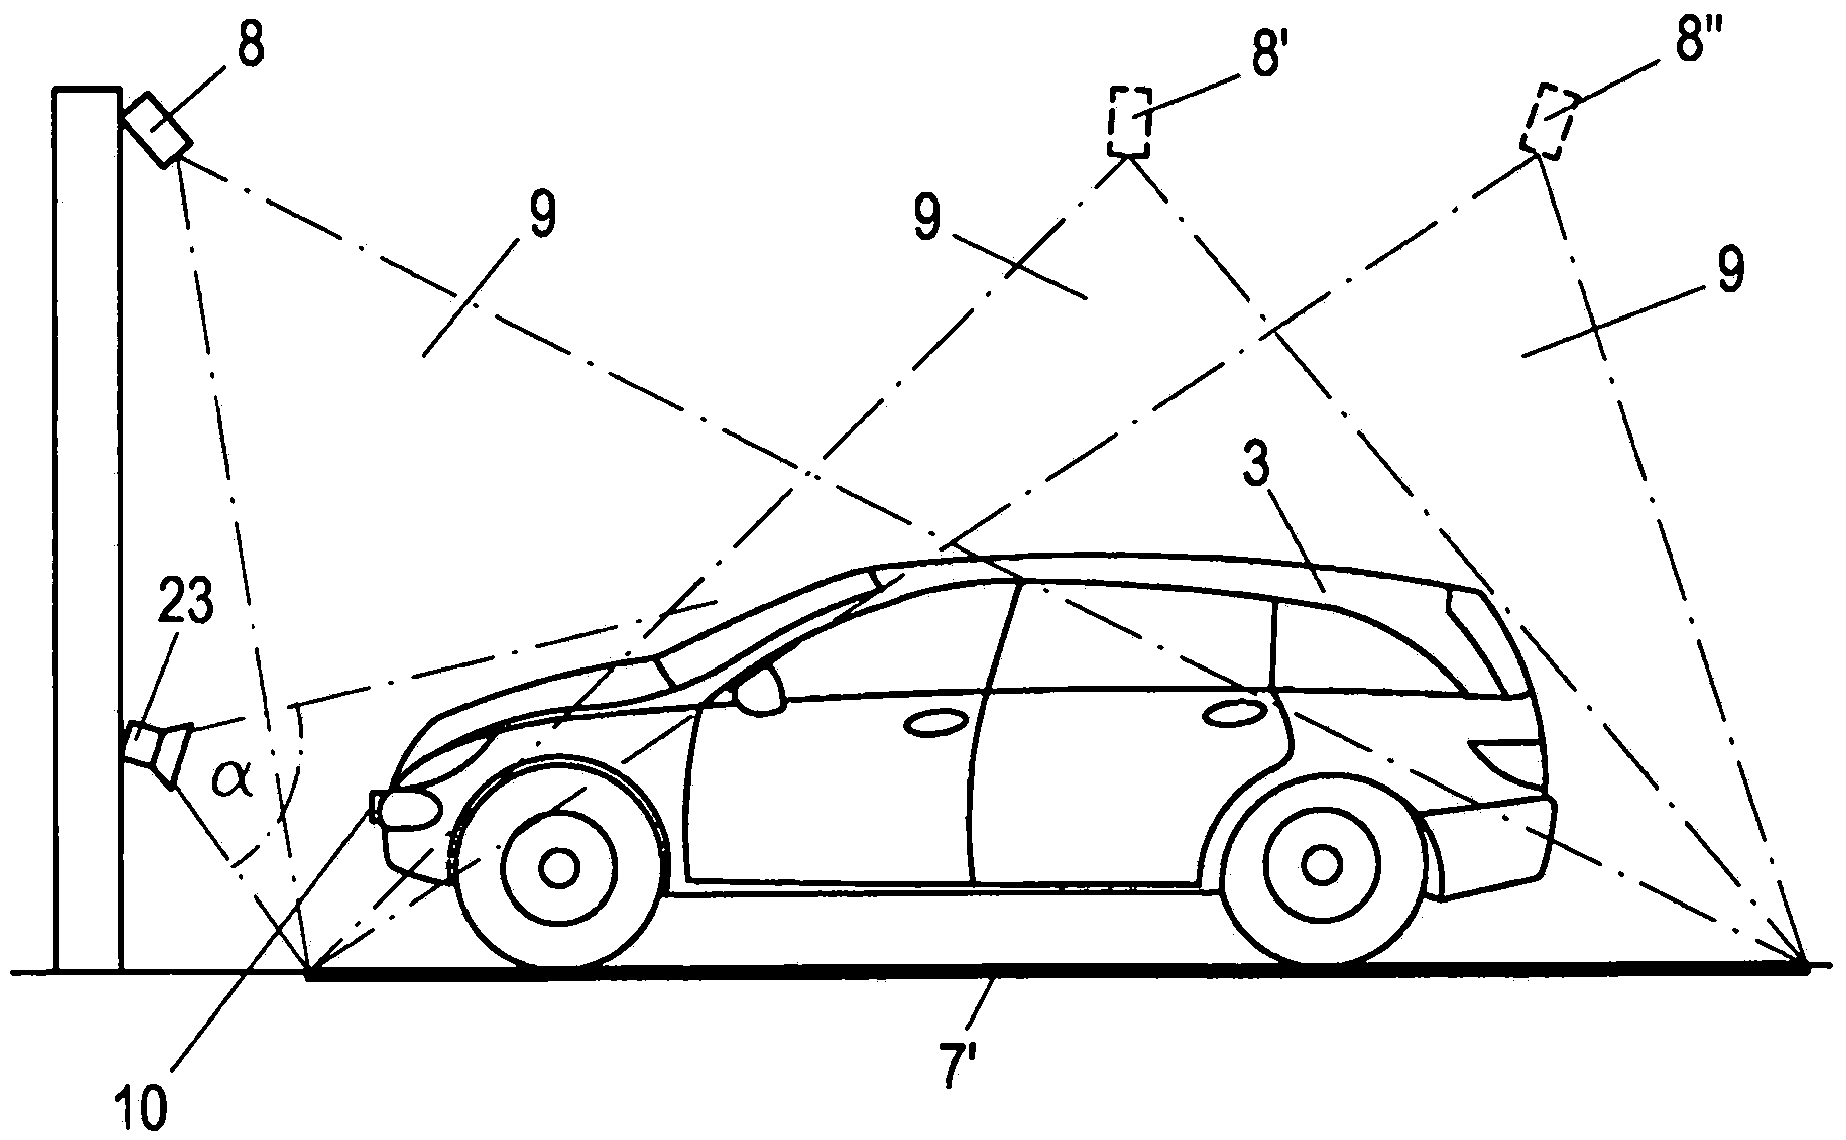 Device for monitoring a vehicle parking place